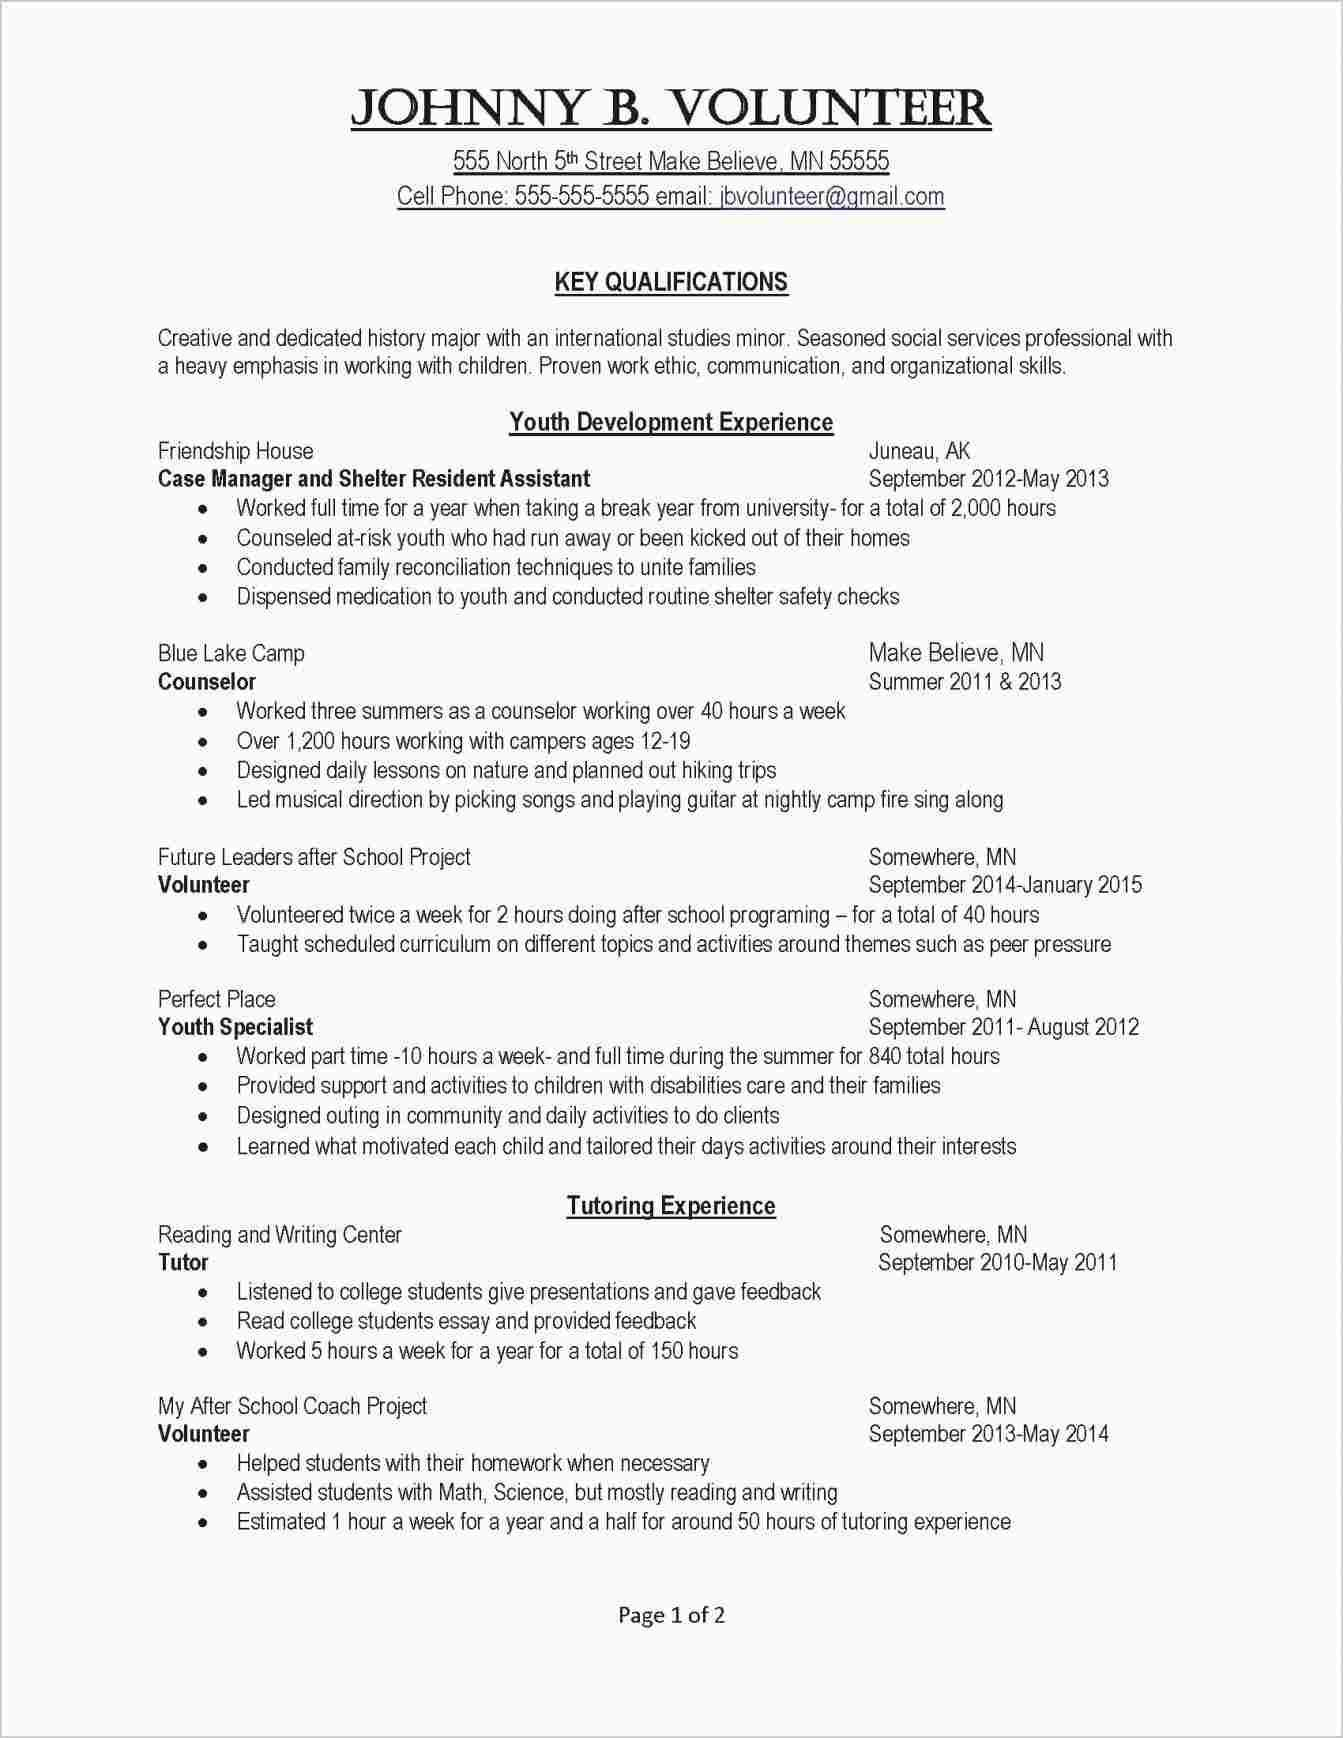 cv cover letter 16 year old